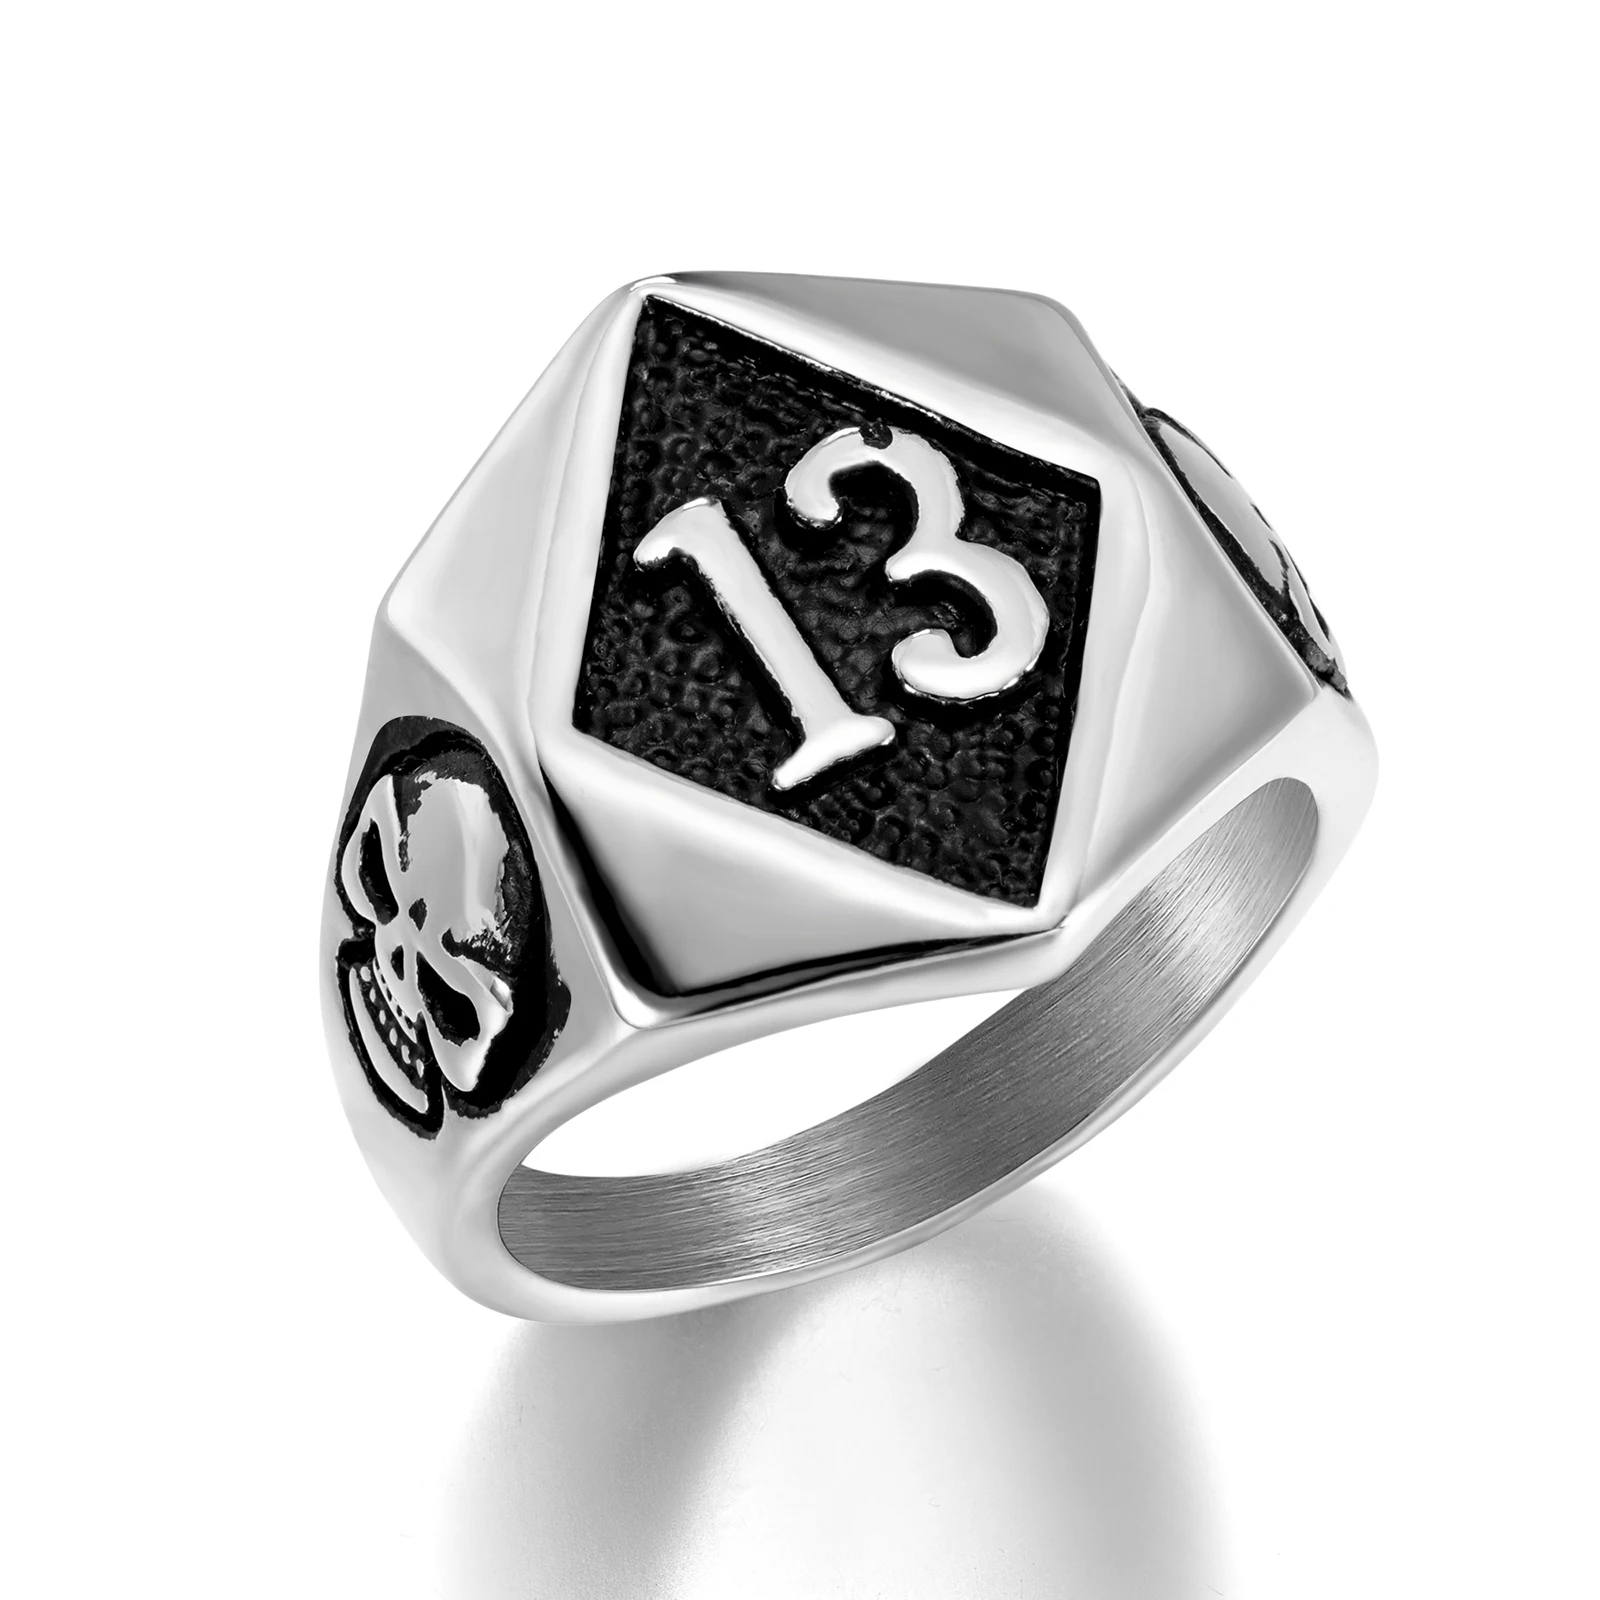 Punk Rock Style Stainless Steel Jewelry Wholesale Skull Ring Number 13 Men's  Fine Jewelry - Buy Stainless Steel Jewelry Wholesale,Fine Jewelry,Skull Ring  Number 13 Product on Alibaba.com